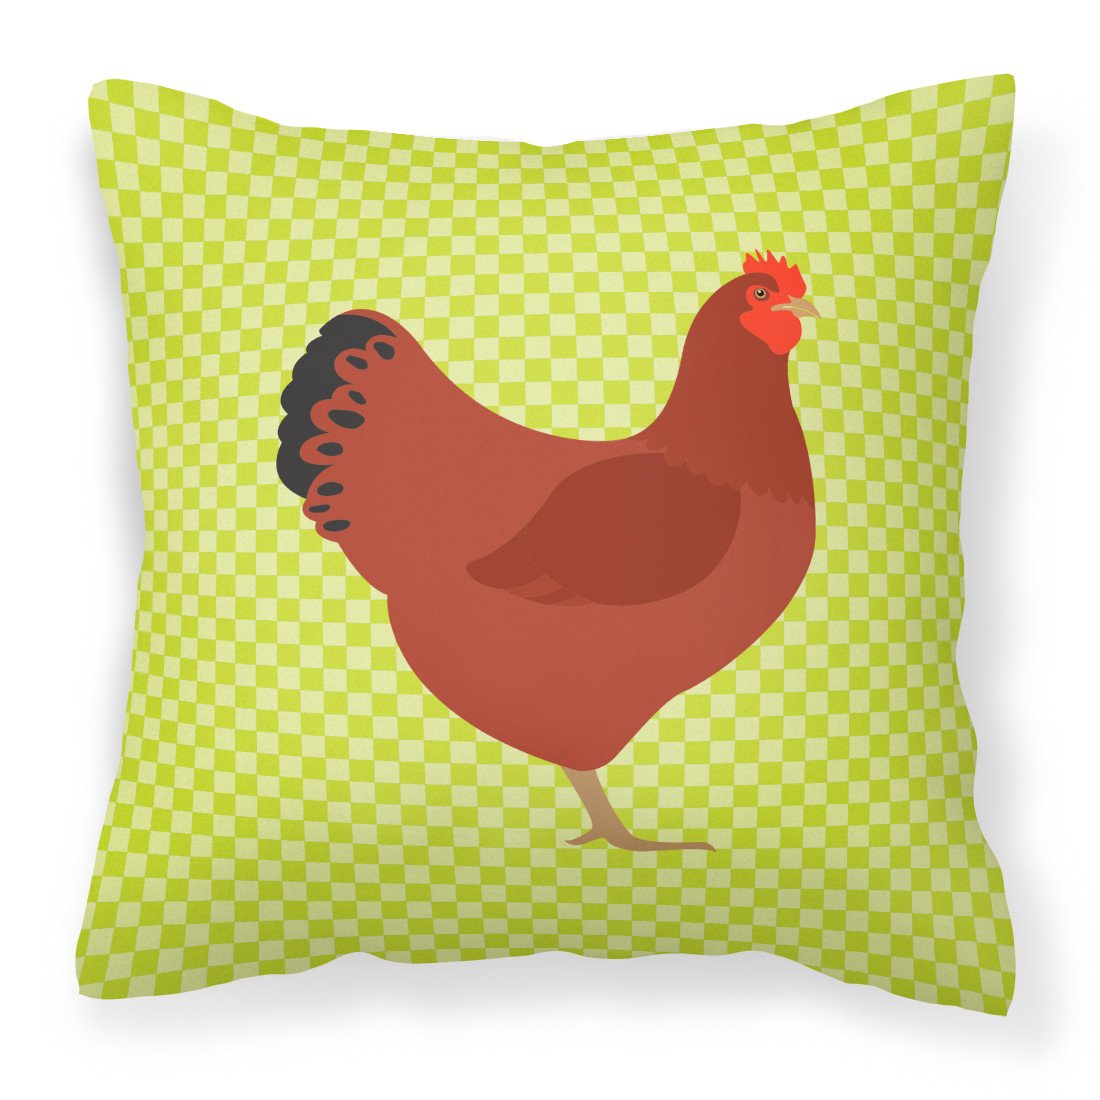 New Hampshire Red Chicken Green Fabric Decorative Pillow BB7669PW1818 by Caroline's Treasures